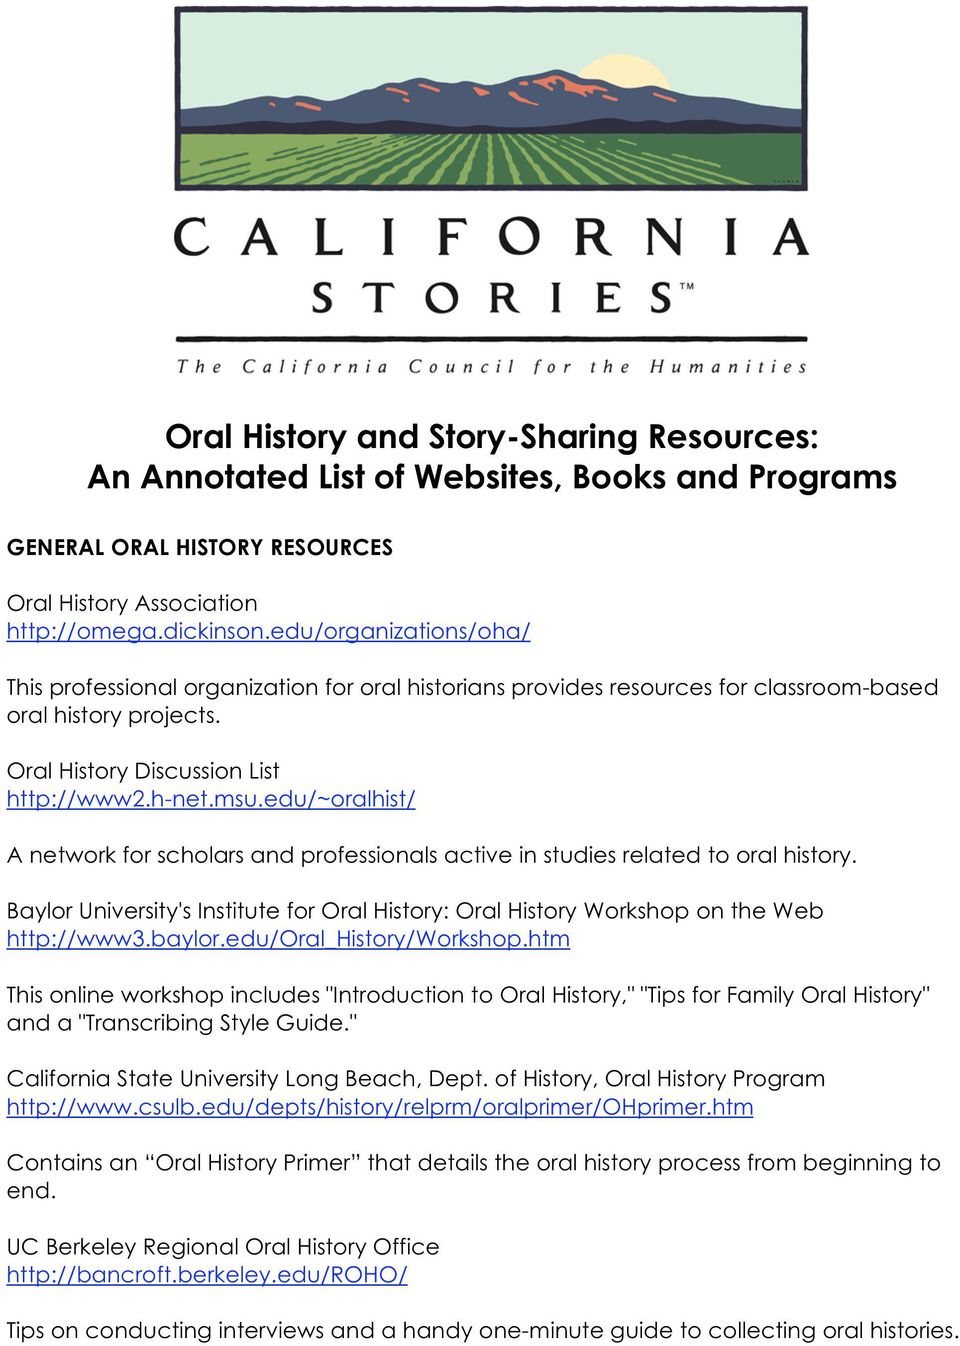 edu/~oralhist/ A network for scholars and professionals active in studies related to oral history. Baylor University's Institute for Oral History: Oral History Workshop on the Web http://www3.baylor.